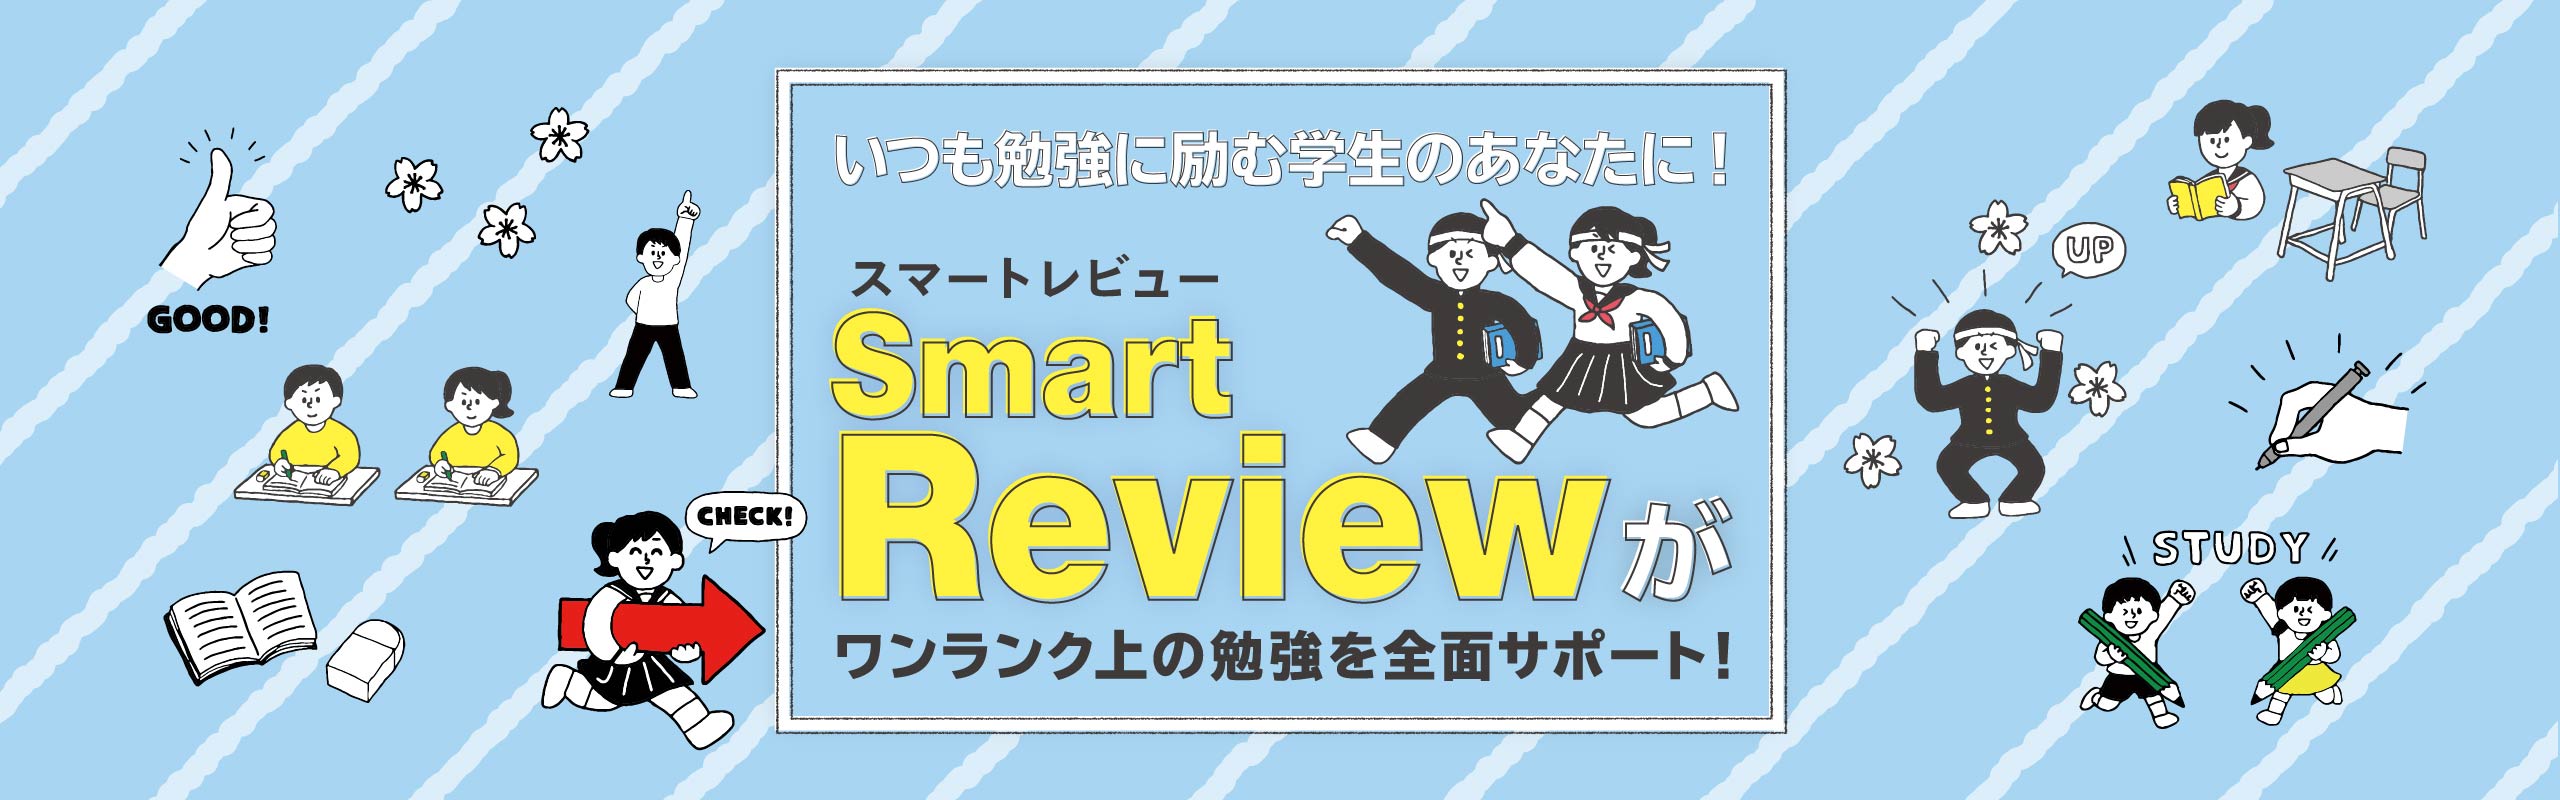 smartreview